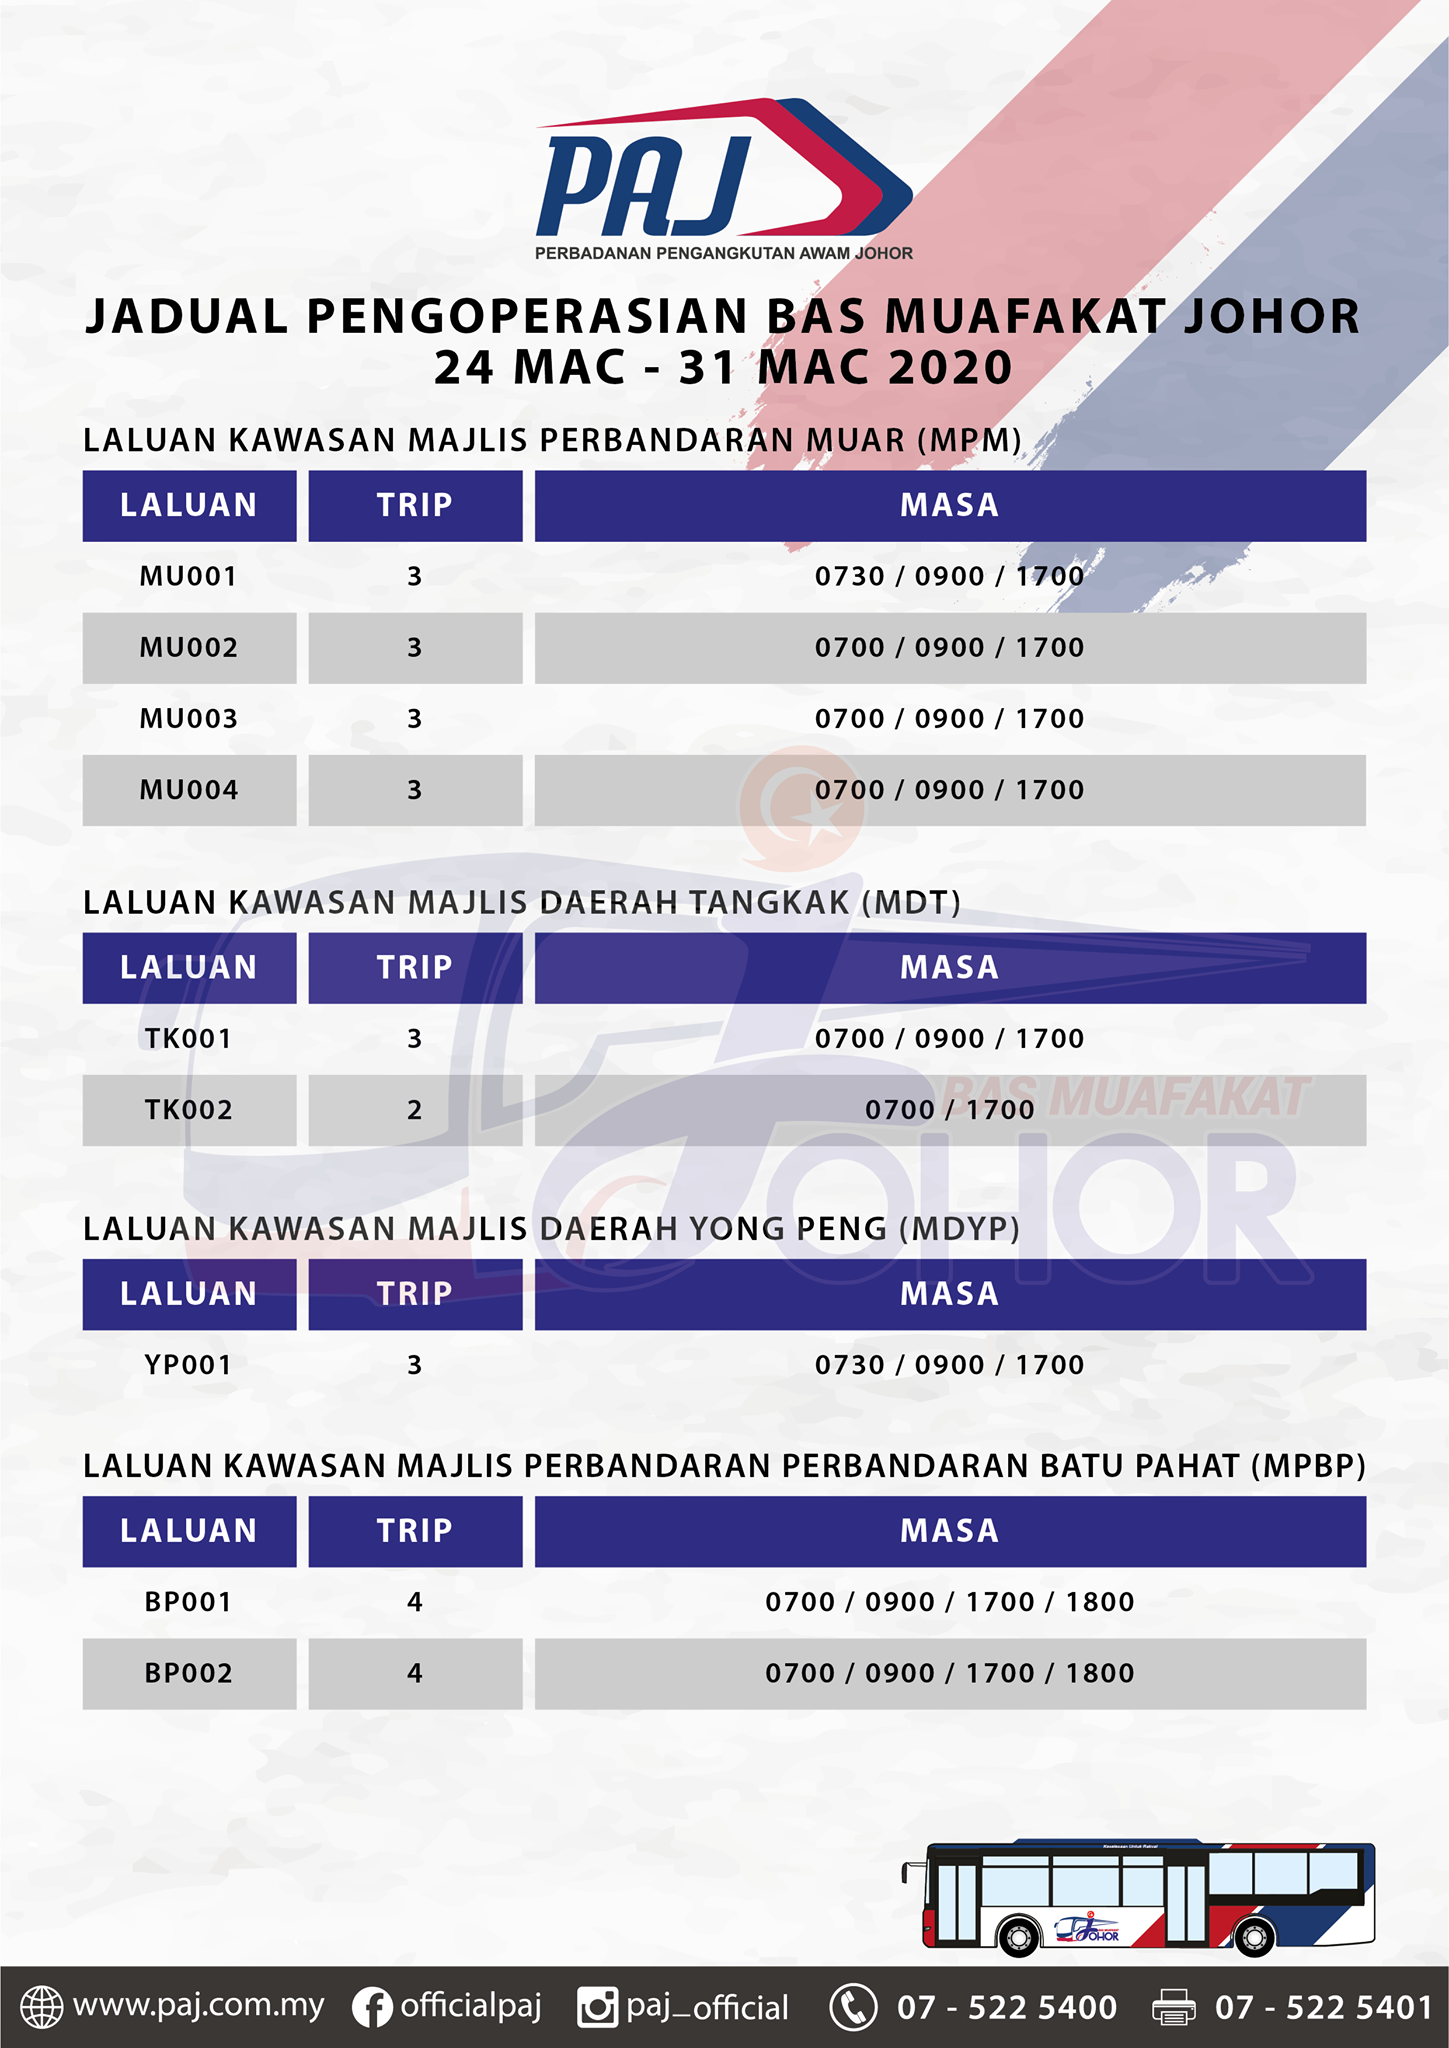 Official PAJ poster on the change in operation hours of Bas Muafakat Johor bus services in Muar, Tangkak, Yong Peng and Batu Pahat districts